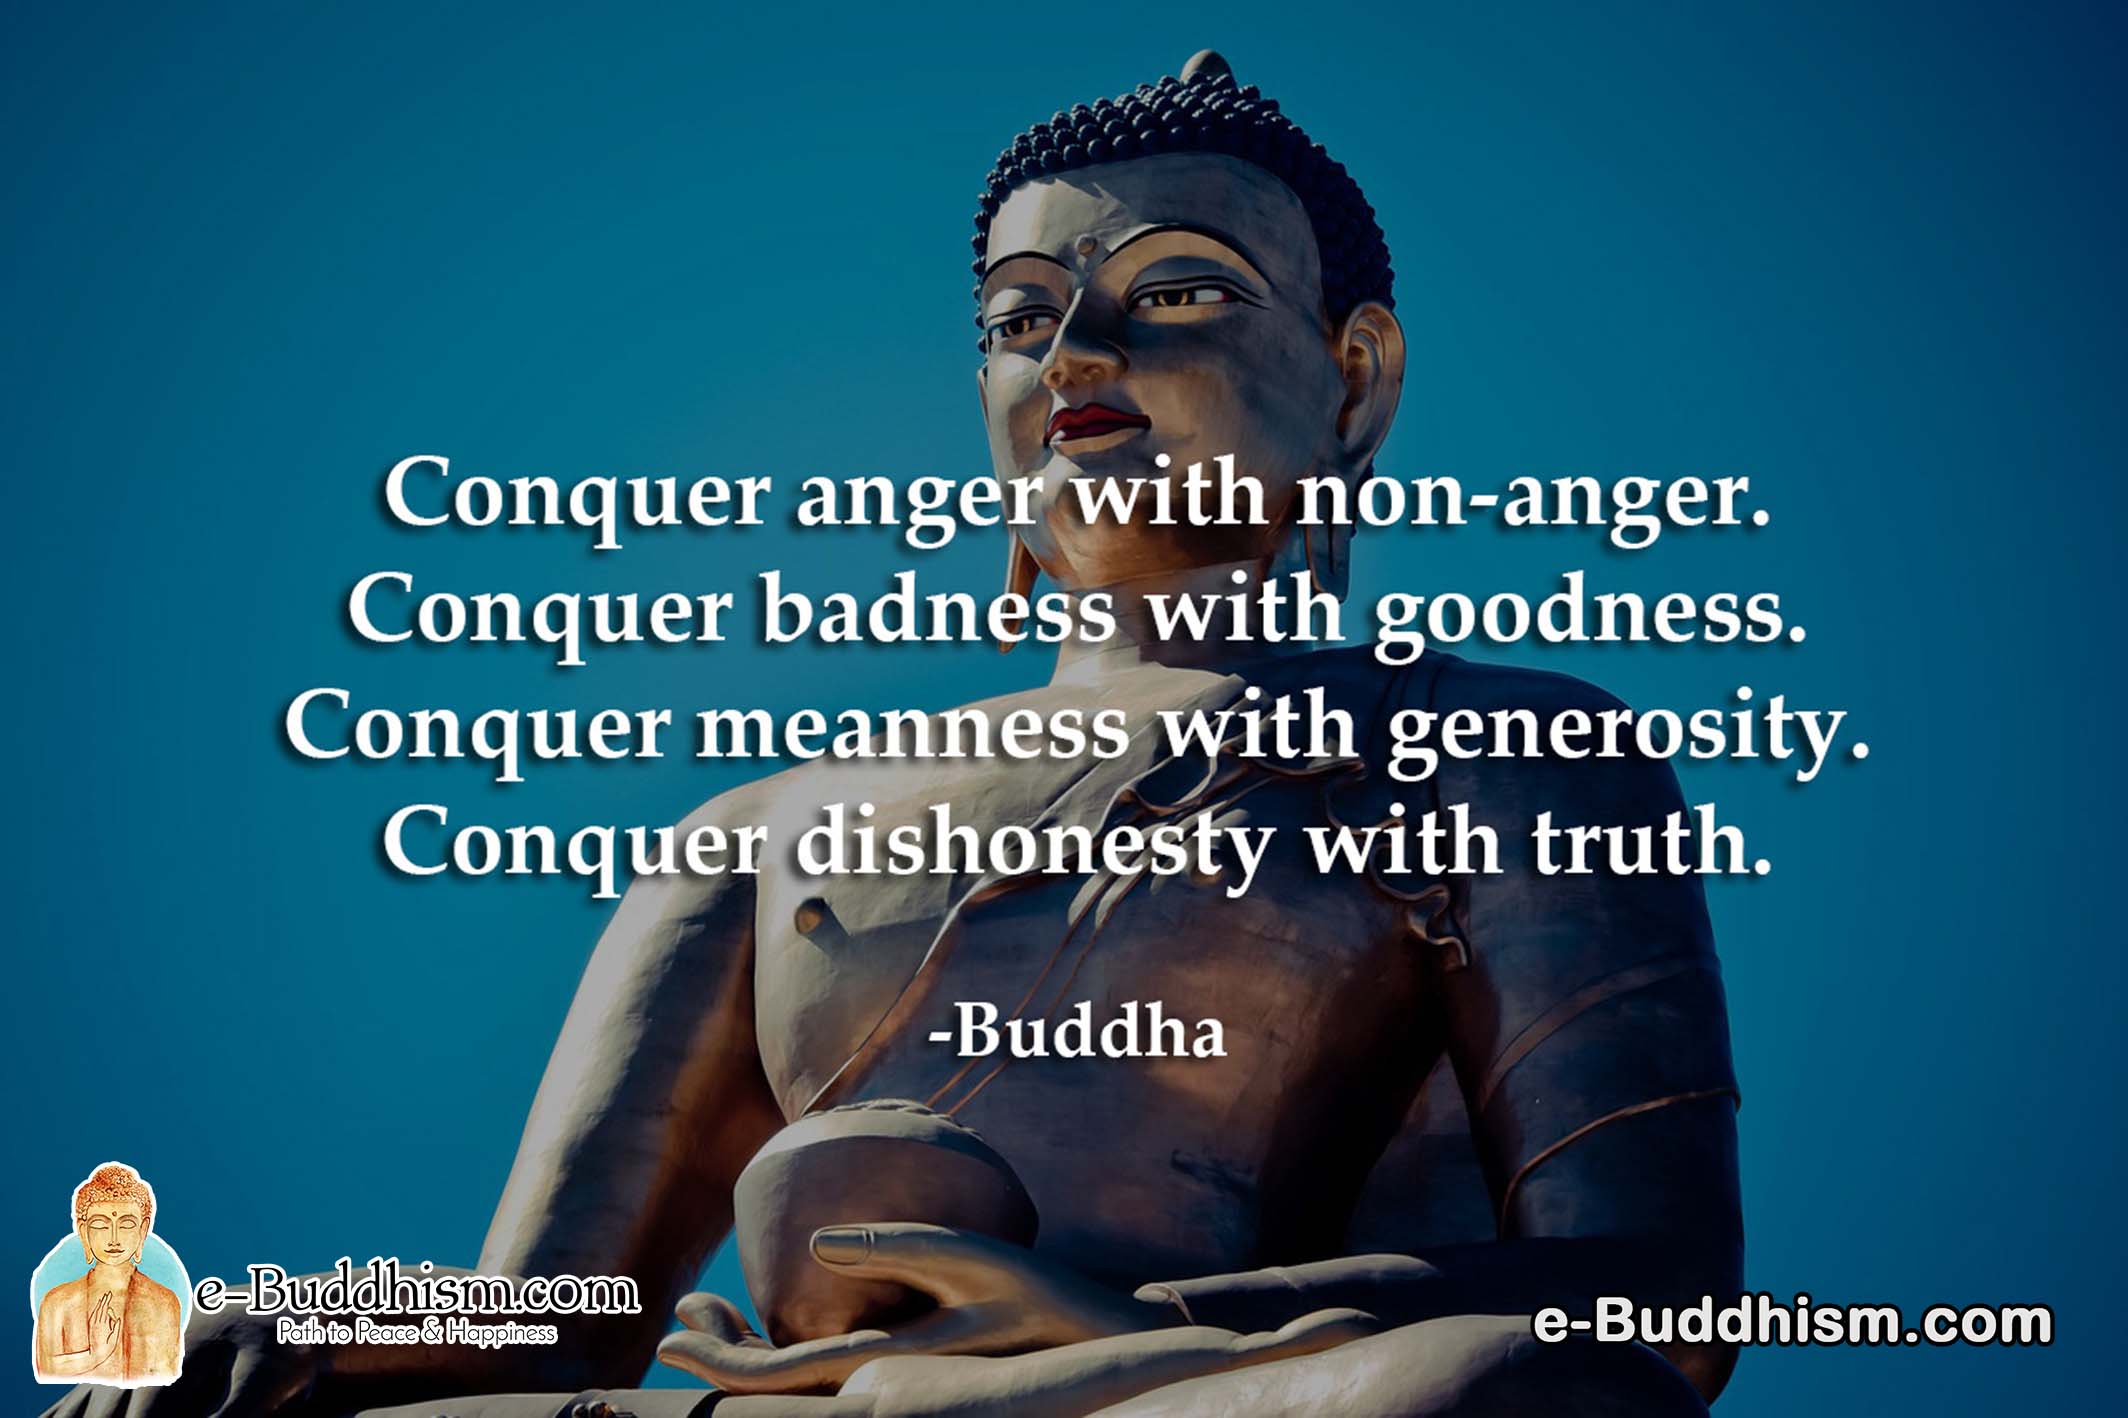 Conquer anger with non-anger. Conquer badness with goodness. Conquer meanness with generosity. Conquer dishonesty with truth. -Buddha